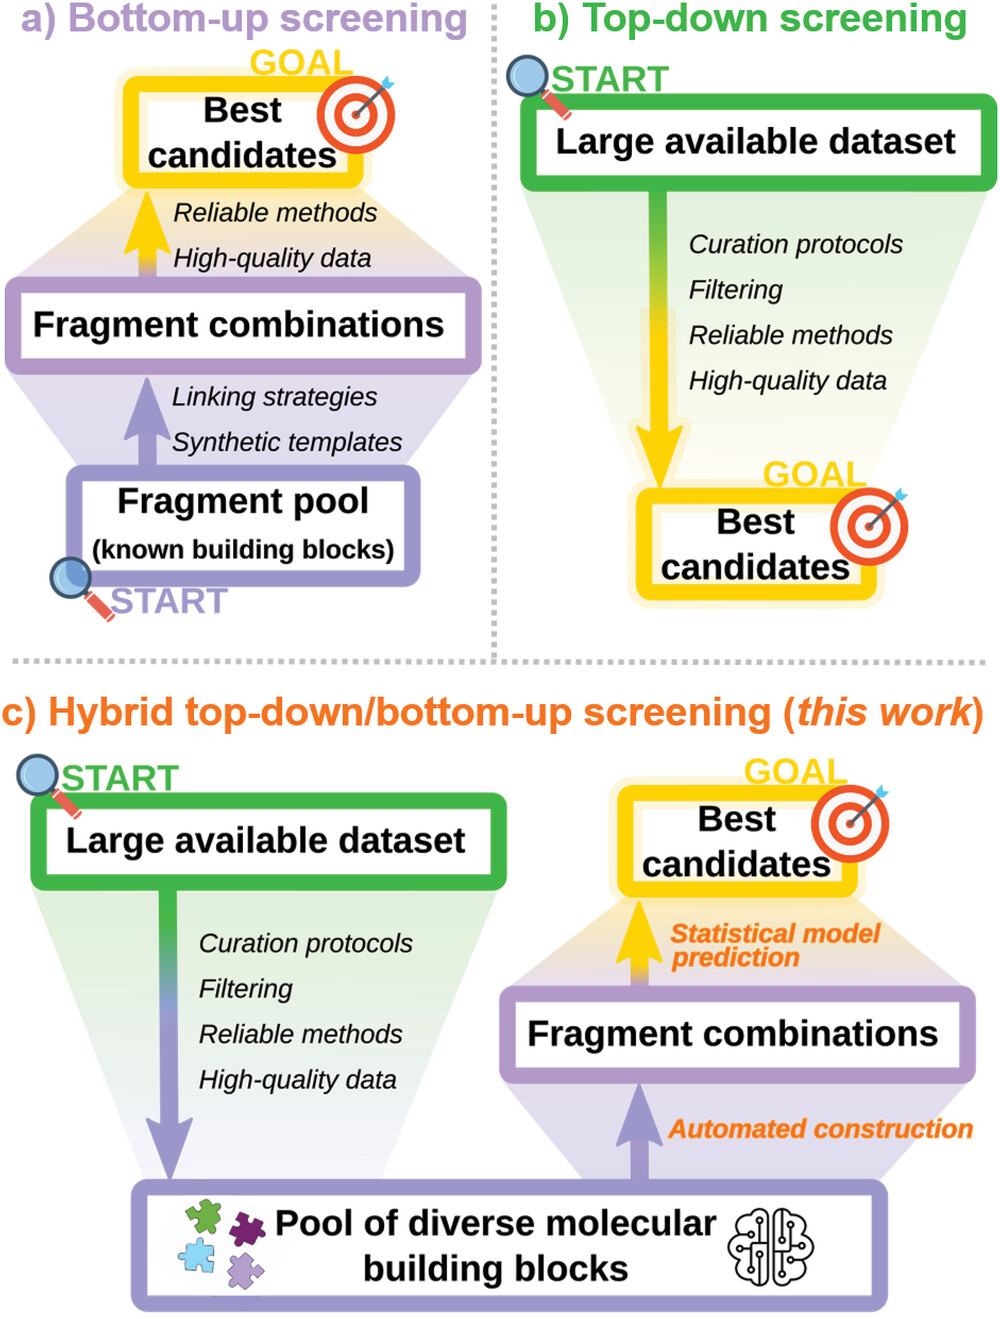 General view of the a) bottom-up (purple) and b) top-down (green) philosophies of high-throughput virtual screening, with with end-goals in yellow.